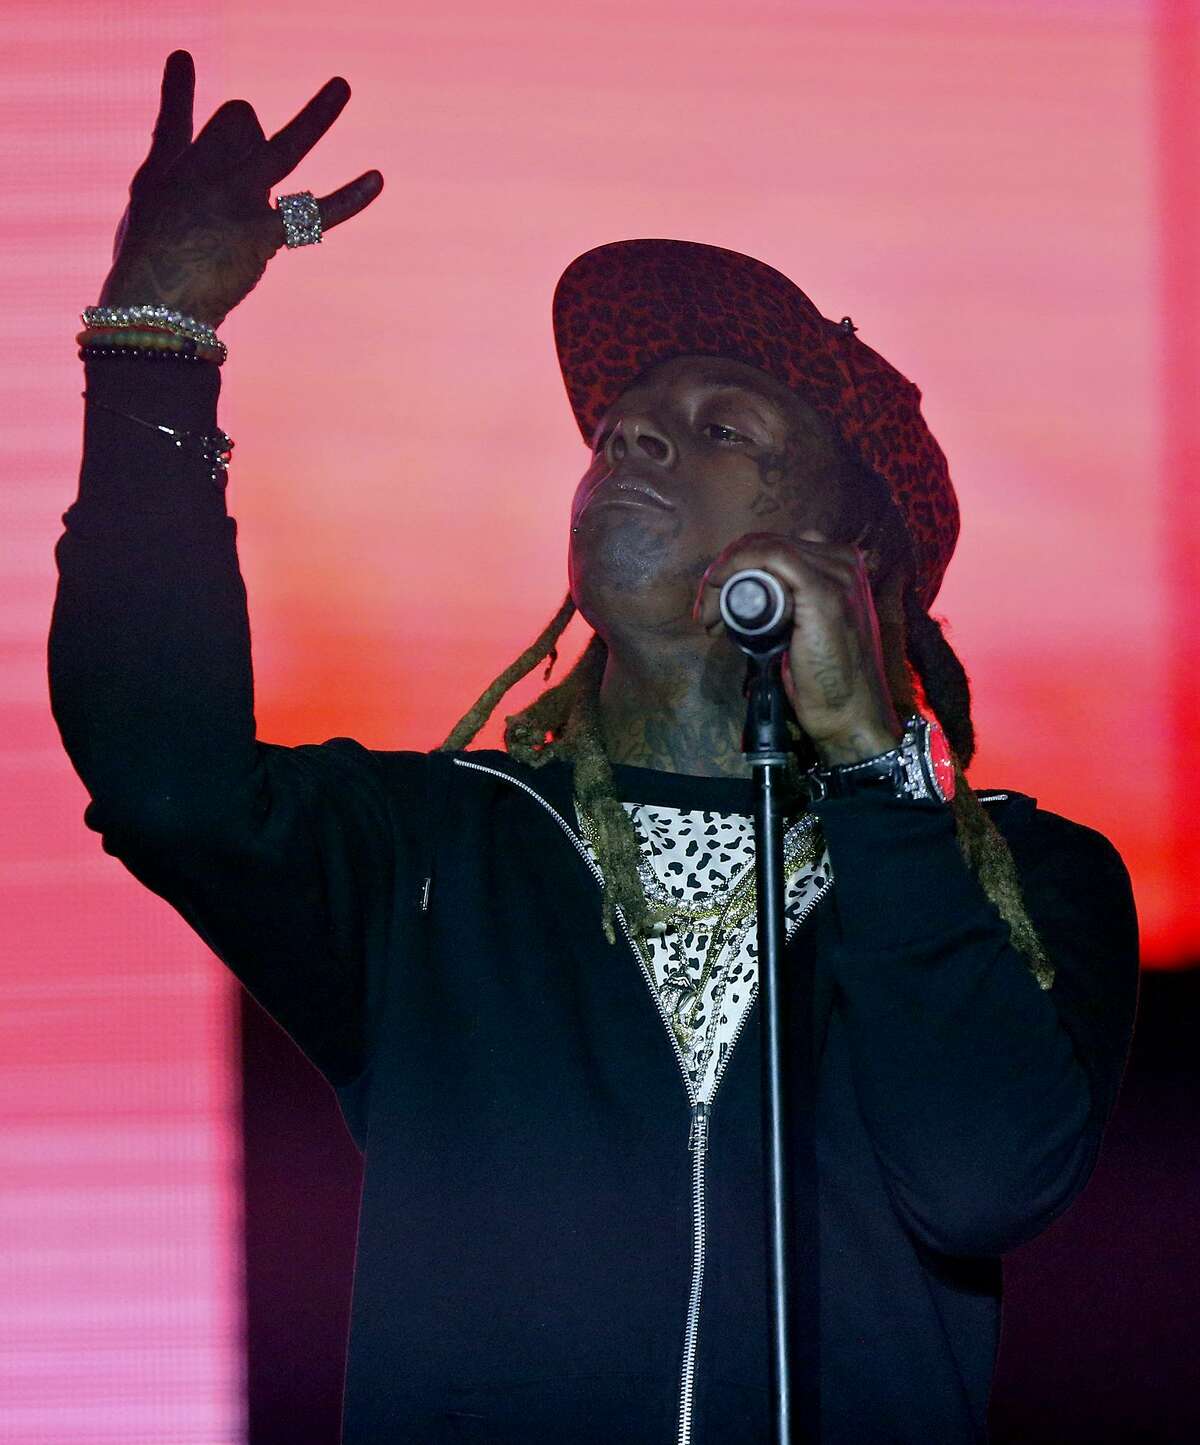 S.A. in rap Lil Wayne dropped a deluxe version of "Tha Carter V" in September with a song that includes a San Antonio mention.